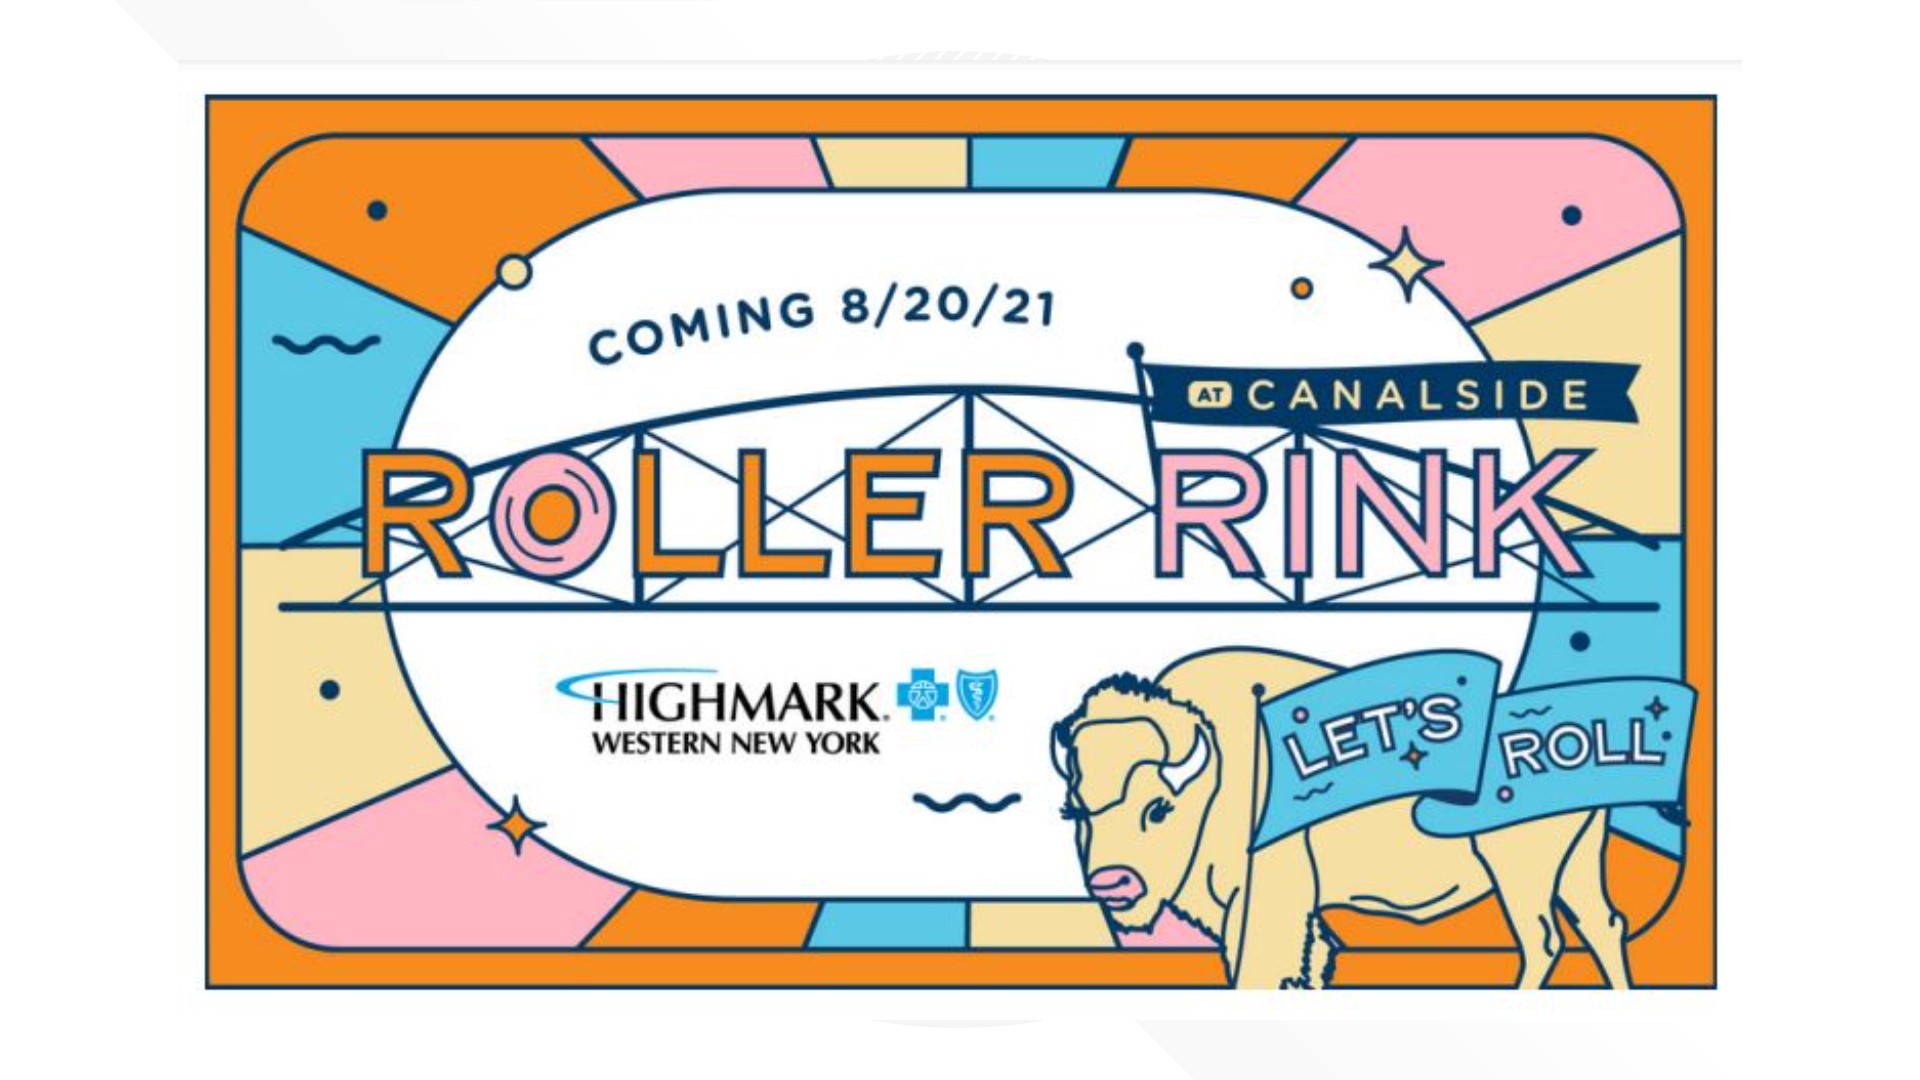 Canalside canals to be converted into a roller rink set to open on August 20th.